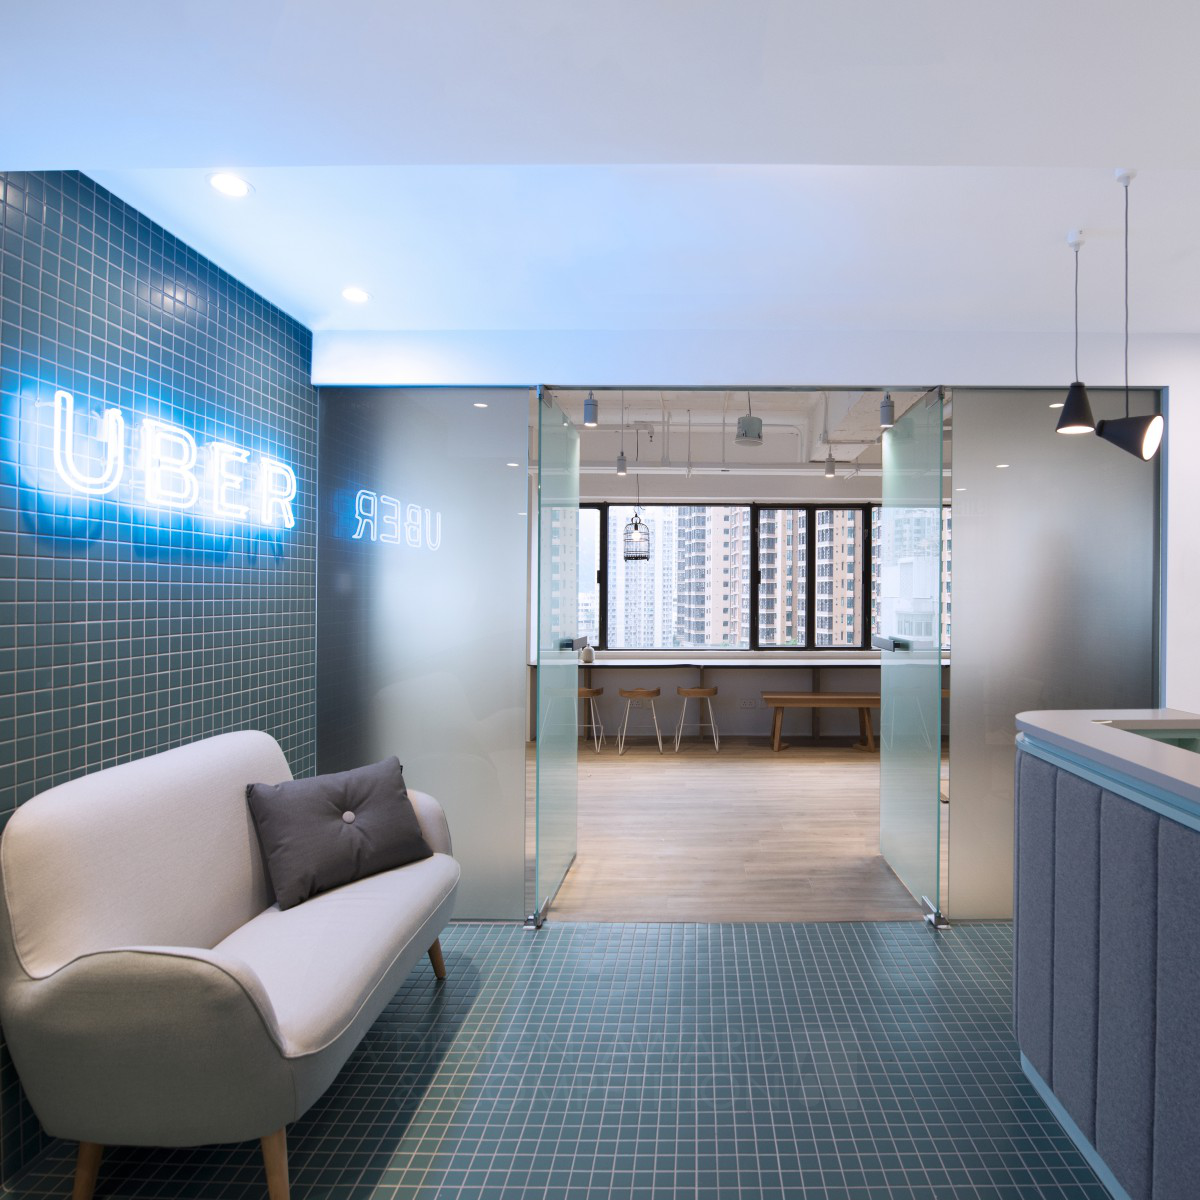 Uber HK Workplace Office by Bean Buro